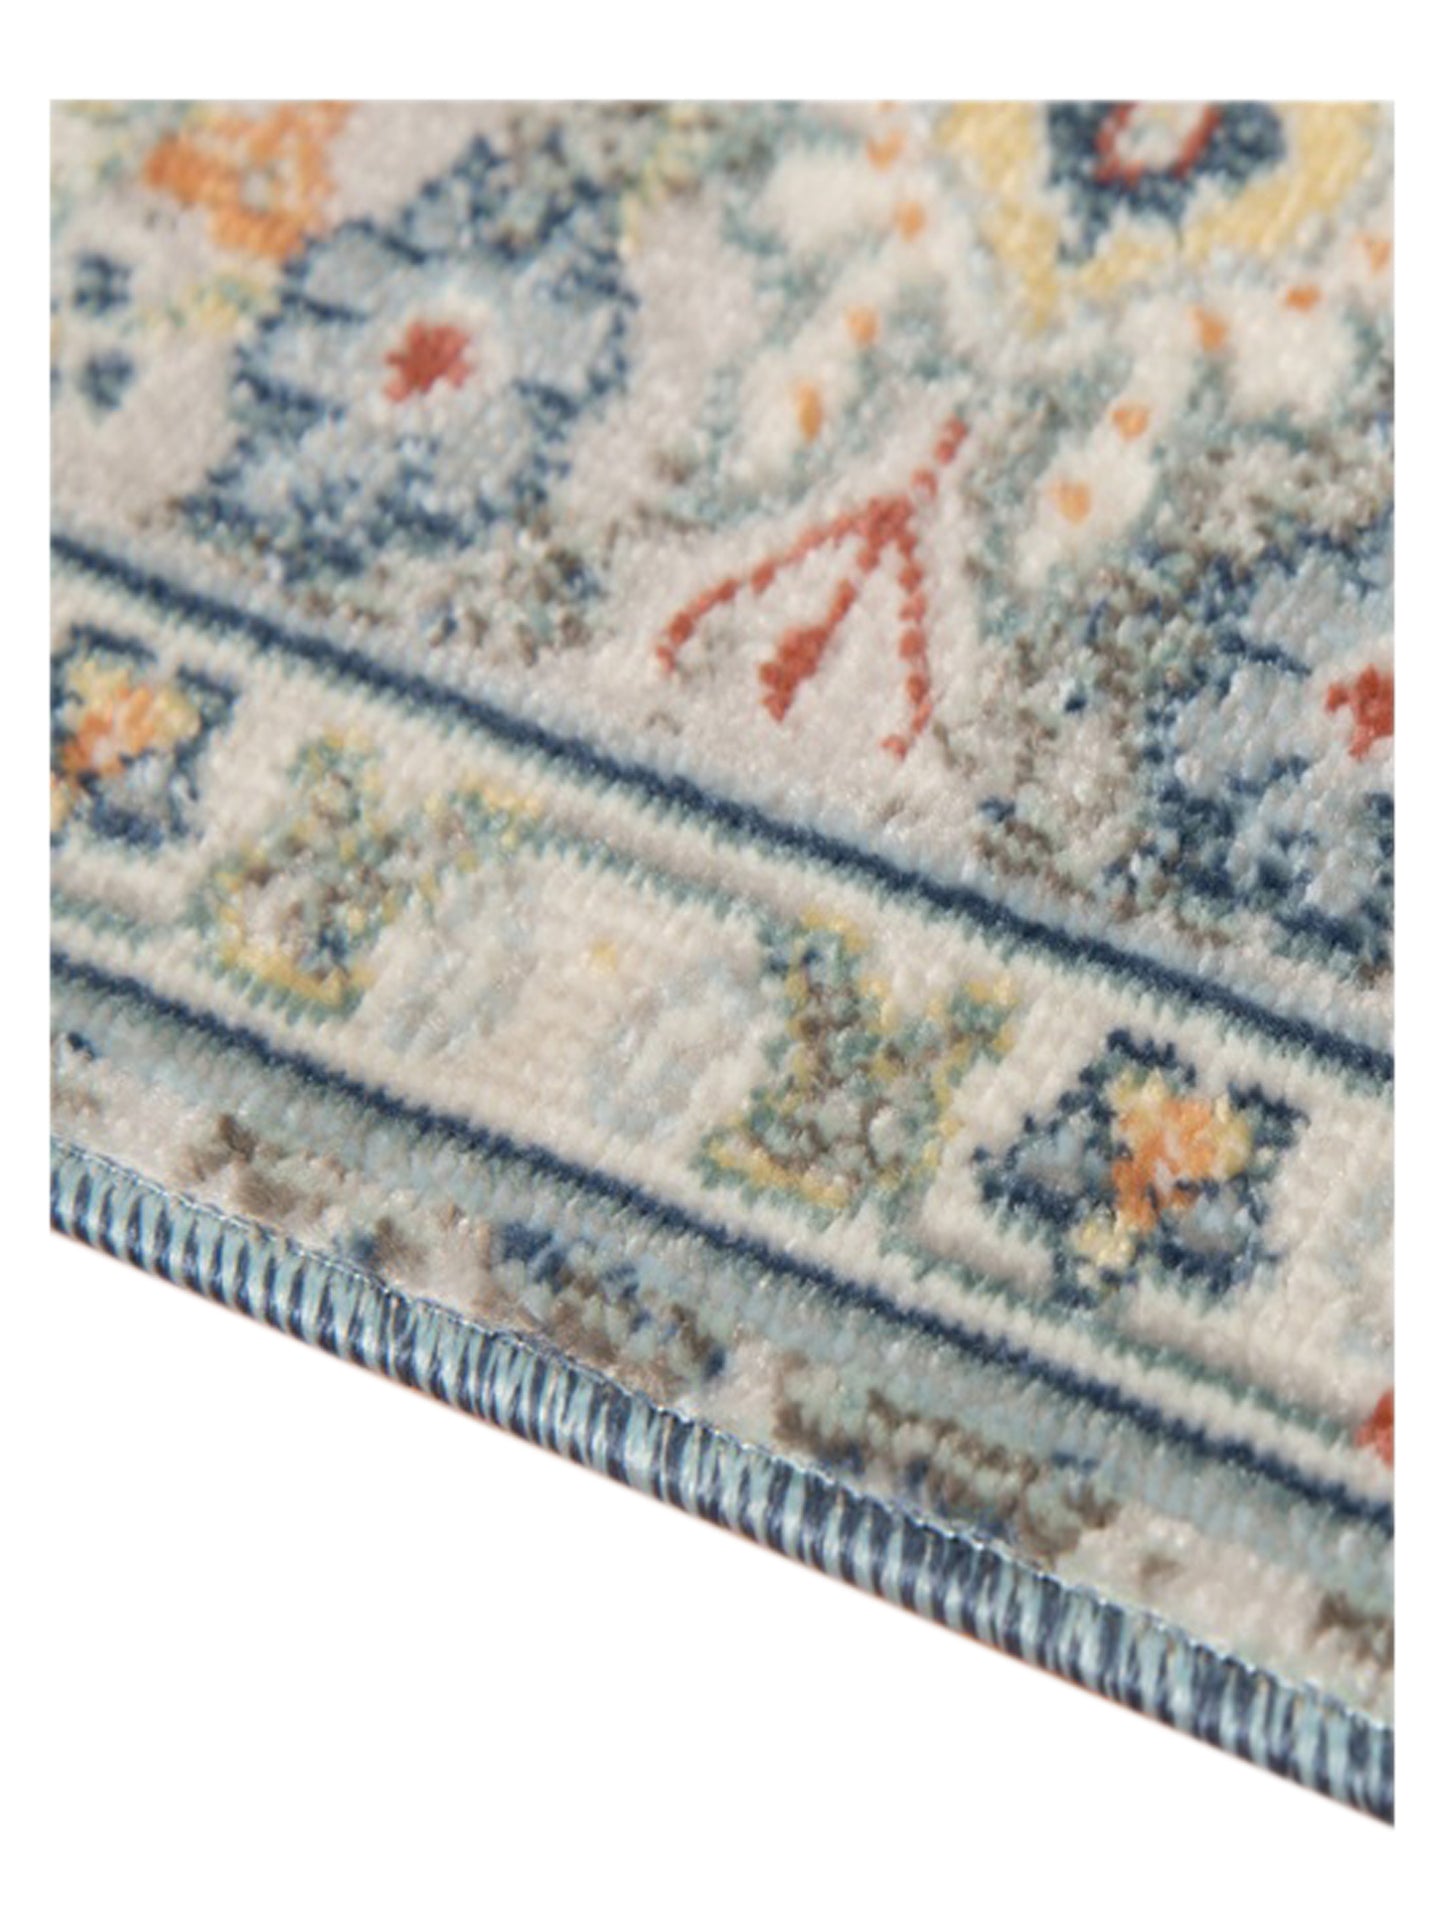 Limited Shay SF-407 BLUE  Traditional Machinemade Rug